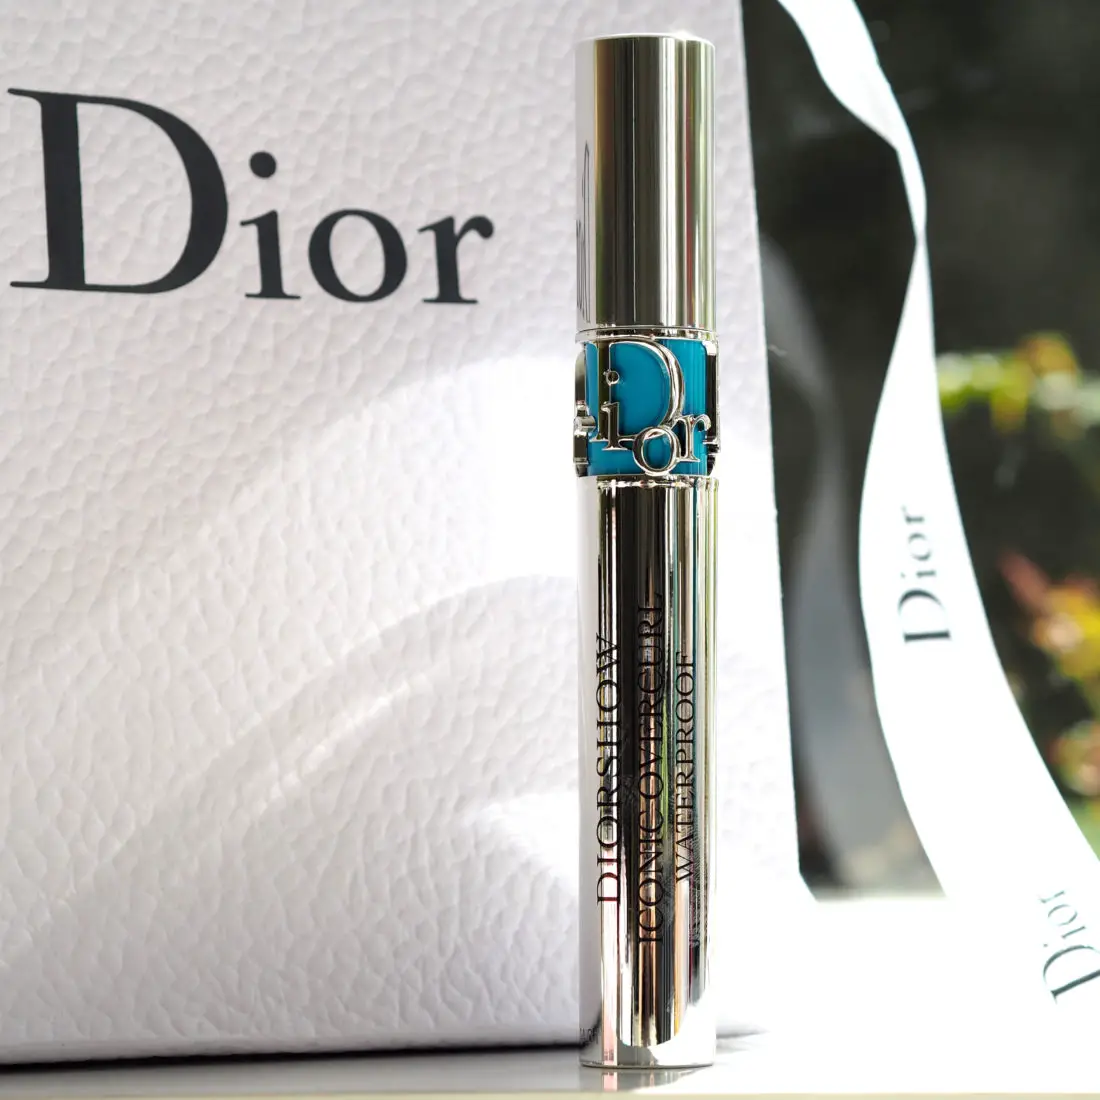 Dior Diorshow Iconic Extreme Waterproof  Reviews  MakeupAlley